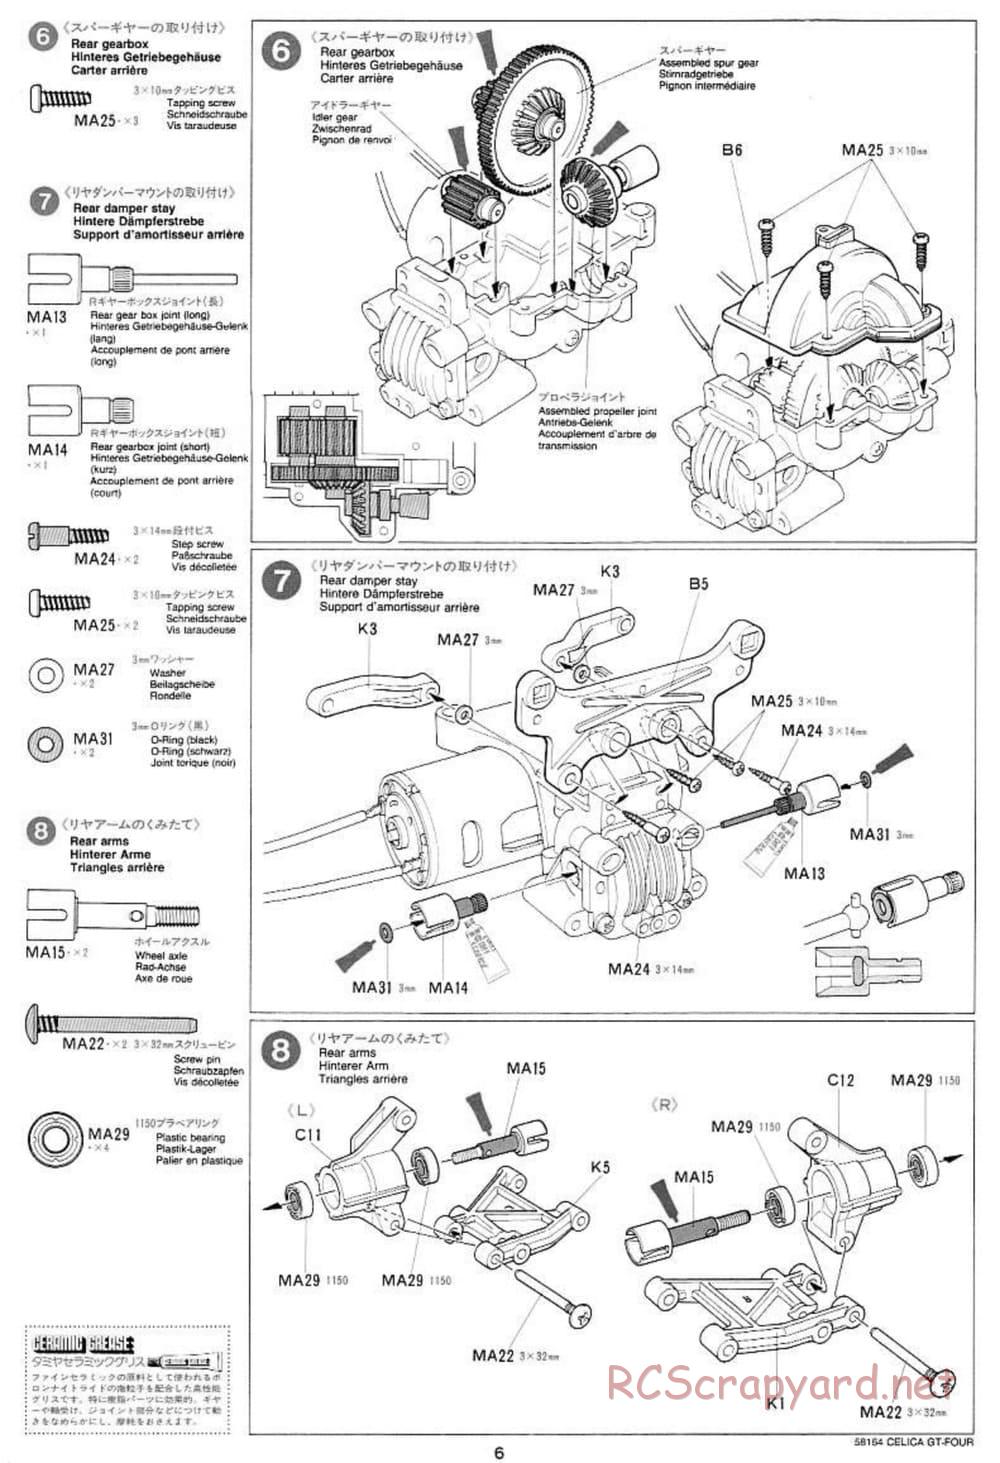 Tamiya - Toyota Celica GT Four - TA-02 Chassis - Manual - Page 6